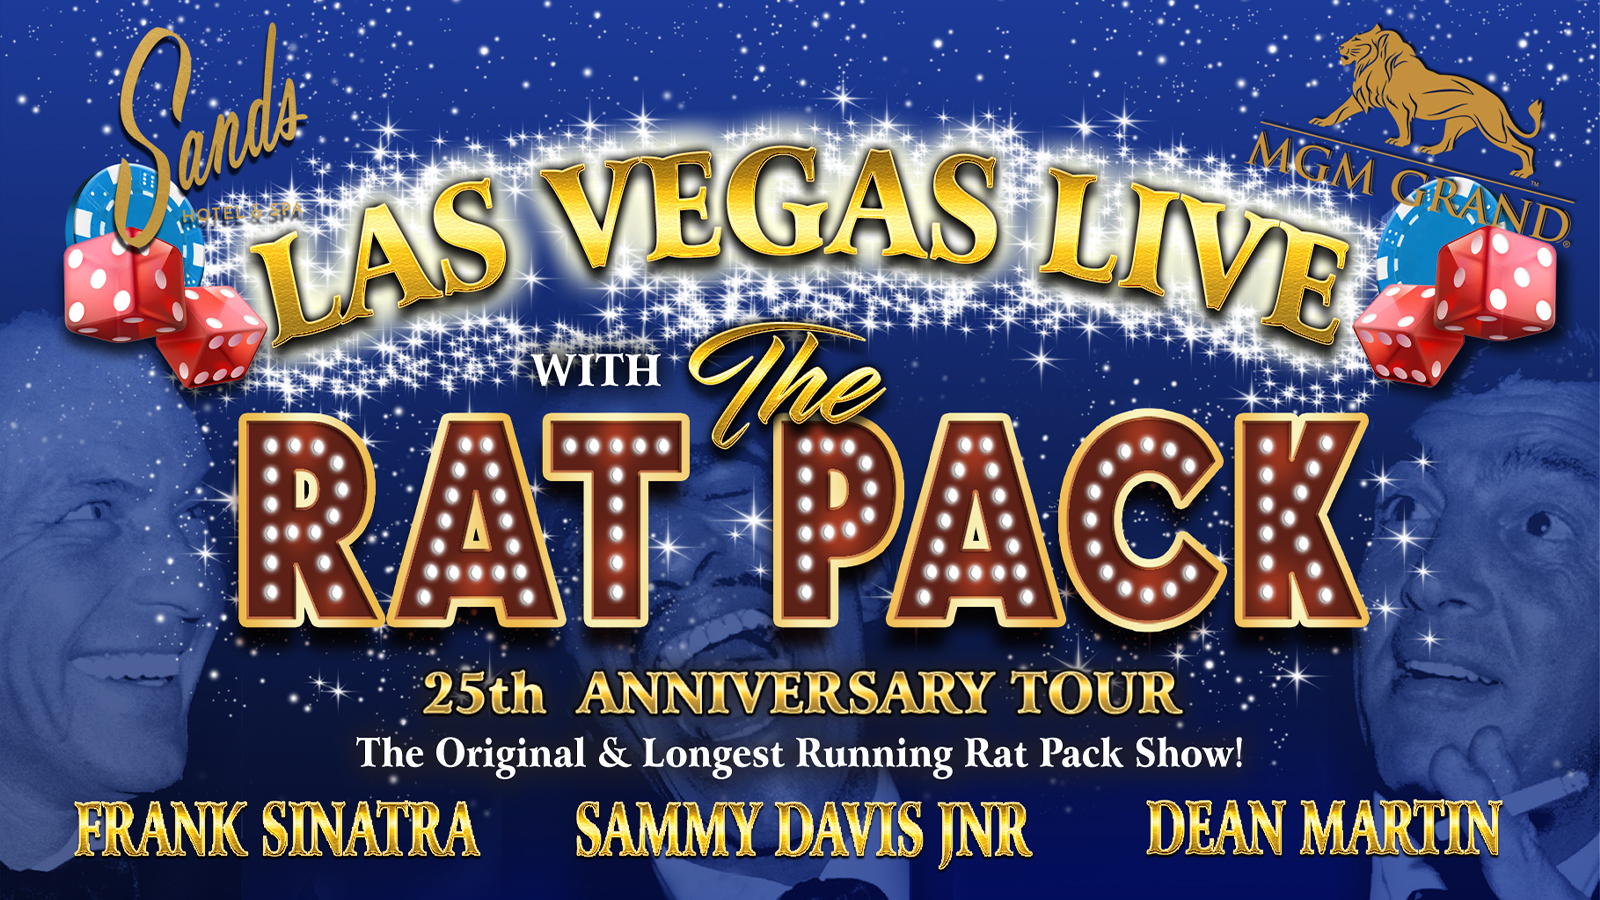 Las Vegas Live with The Rat Pack Show – 25th Anniversary Tour